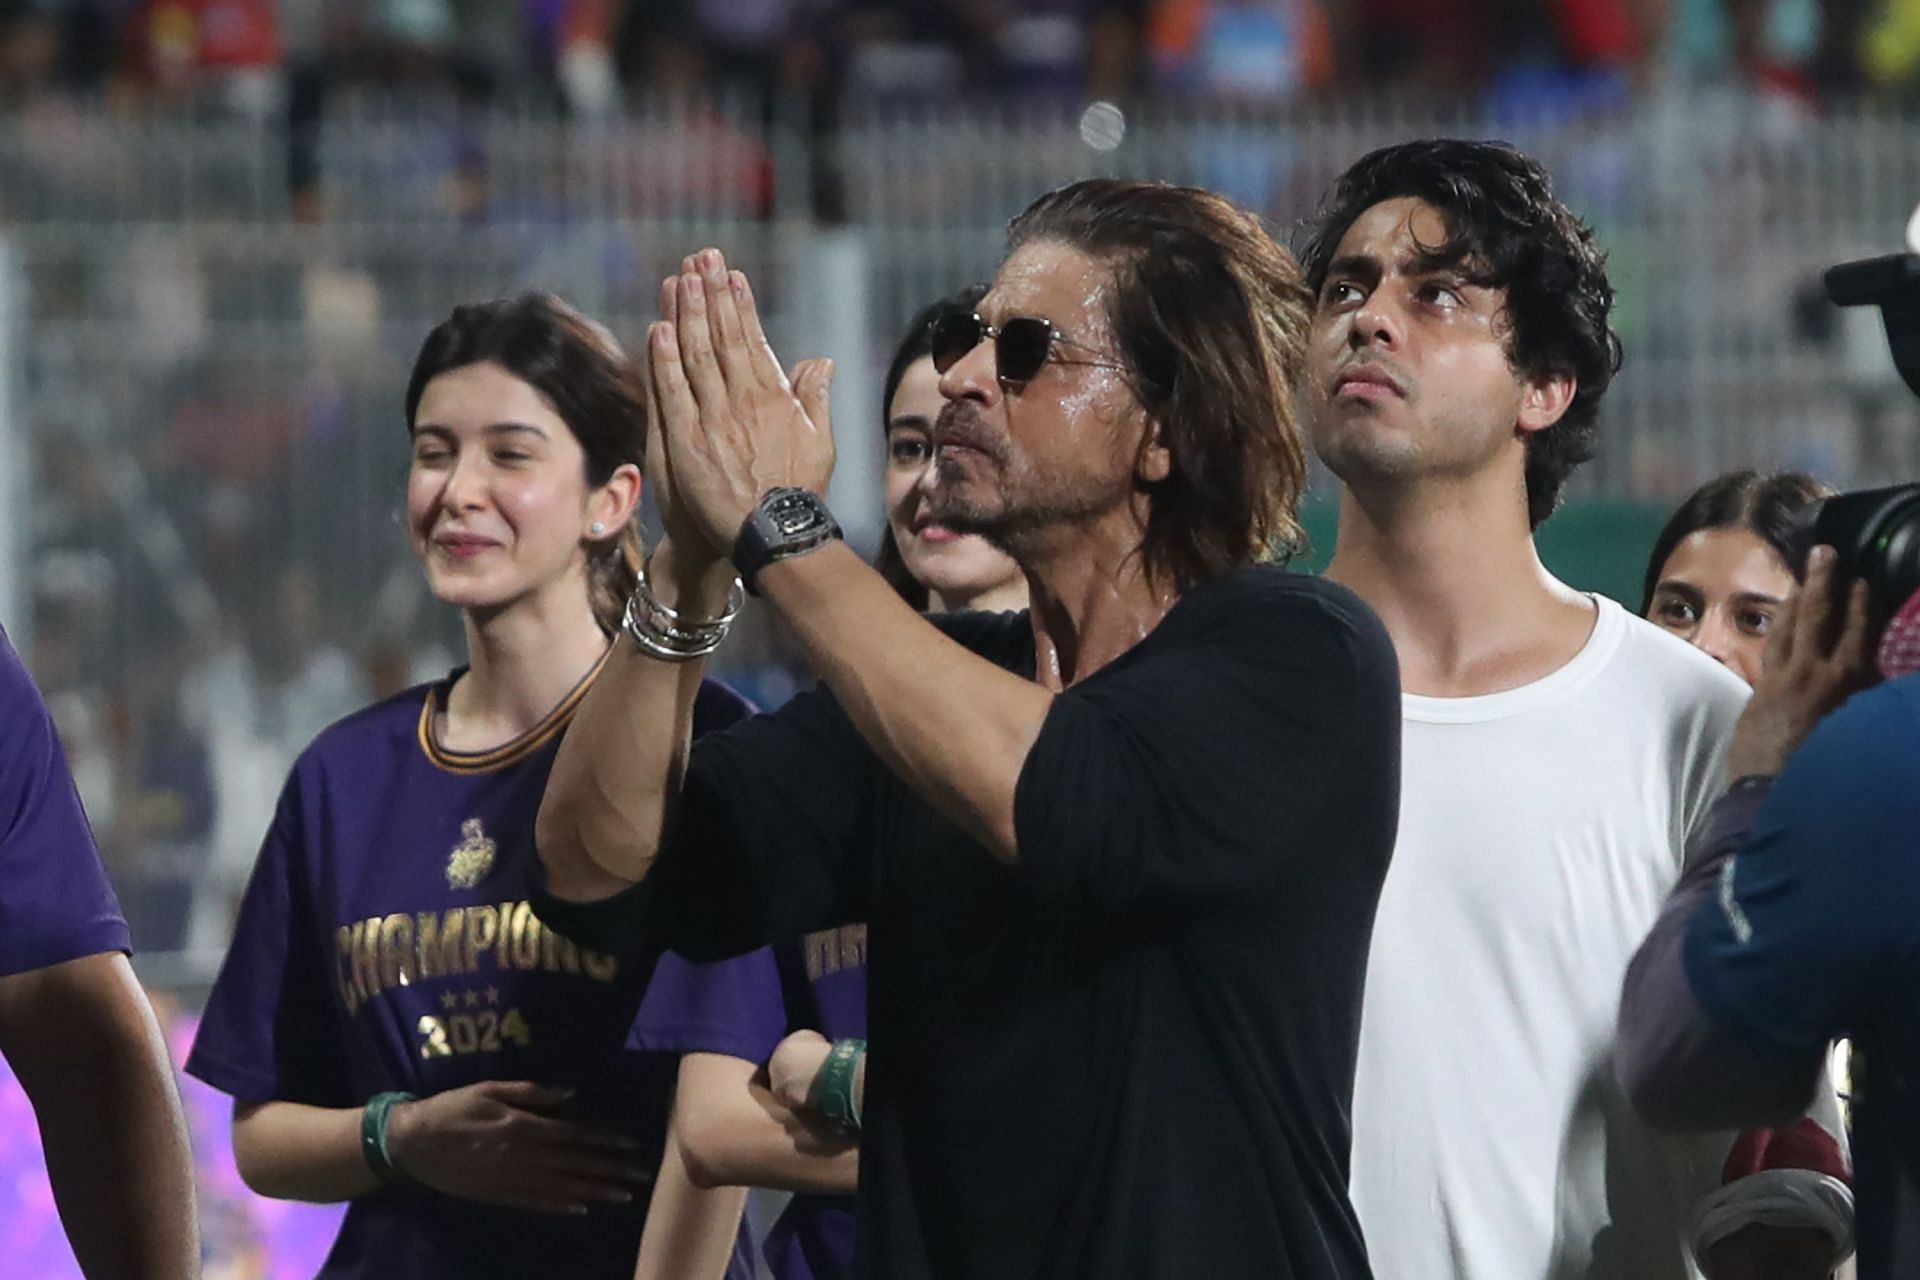 “Dance away all night long” – Shah Rukh Khan pens down special message for 2024 T20 World Cup champions India after rousing welcome back home